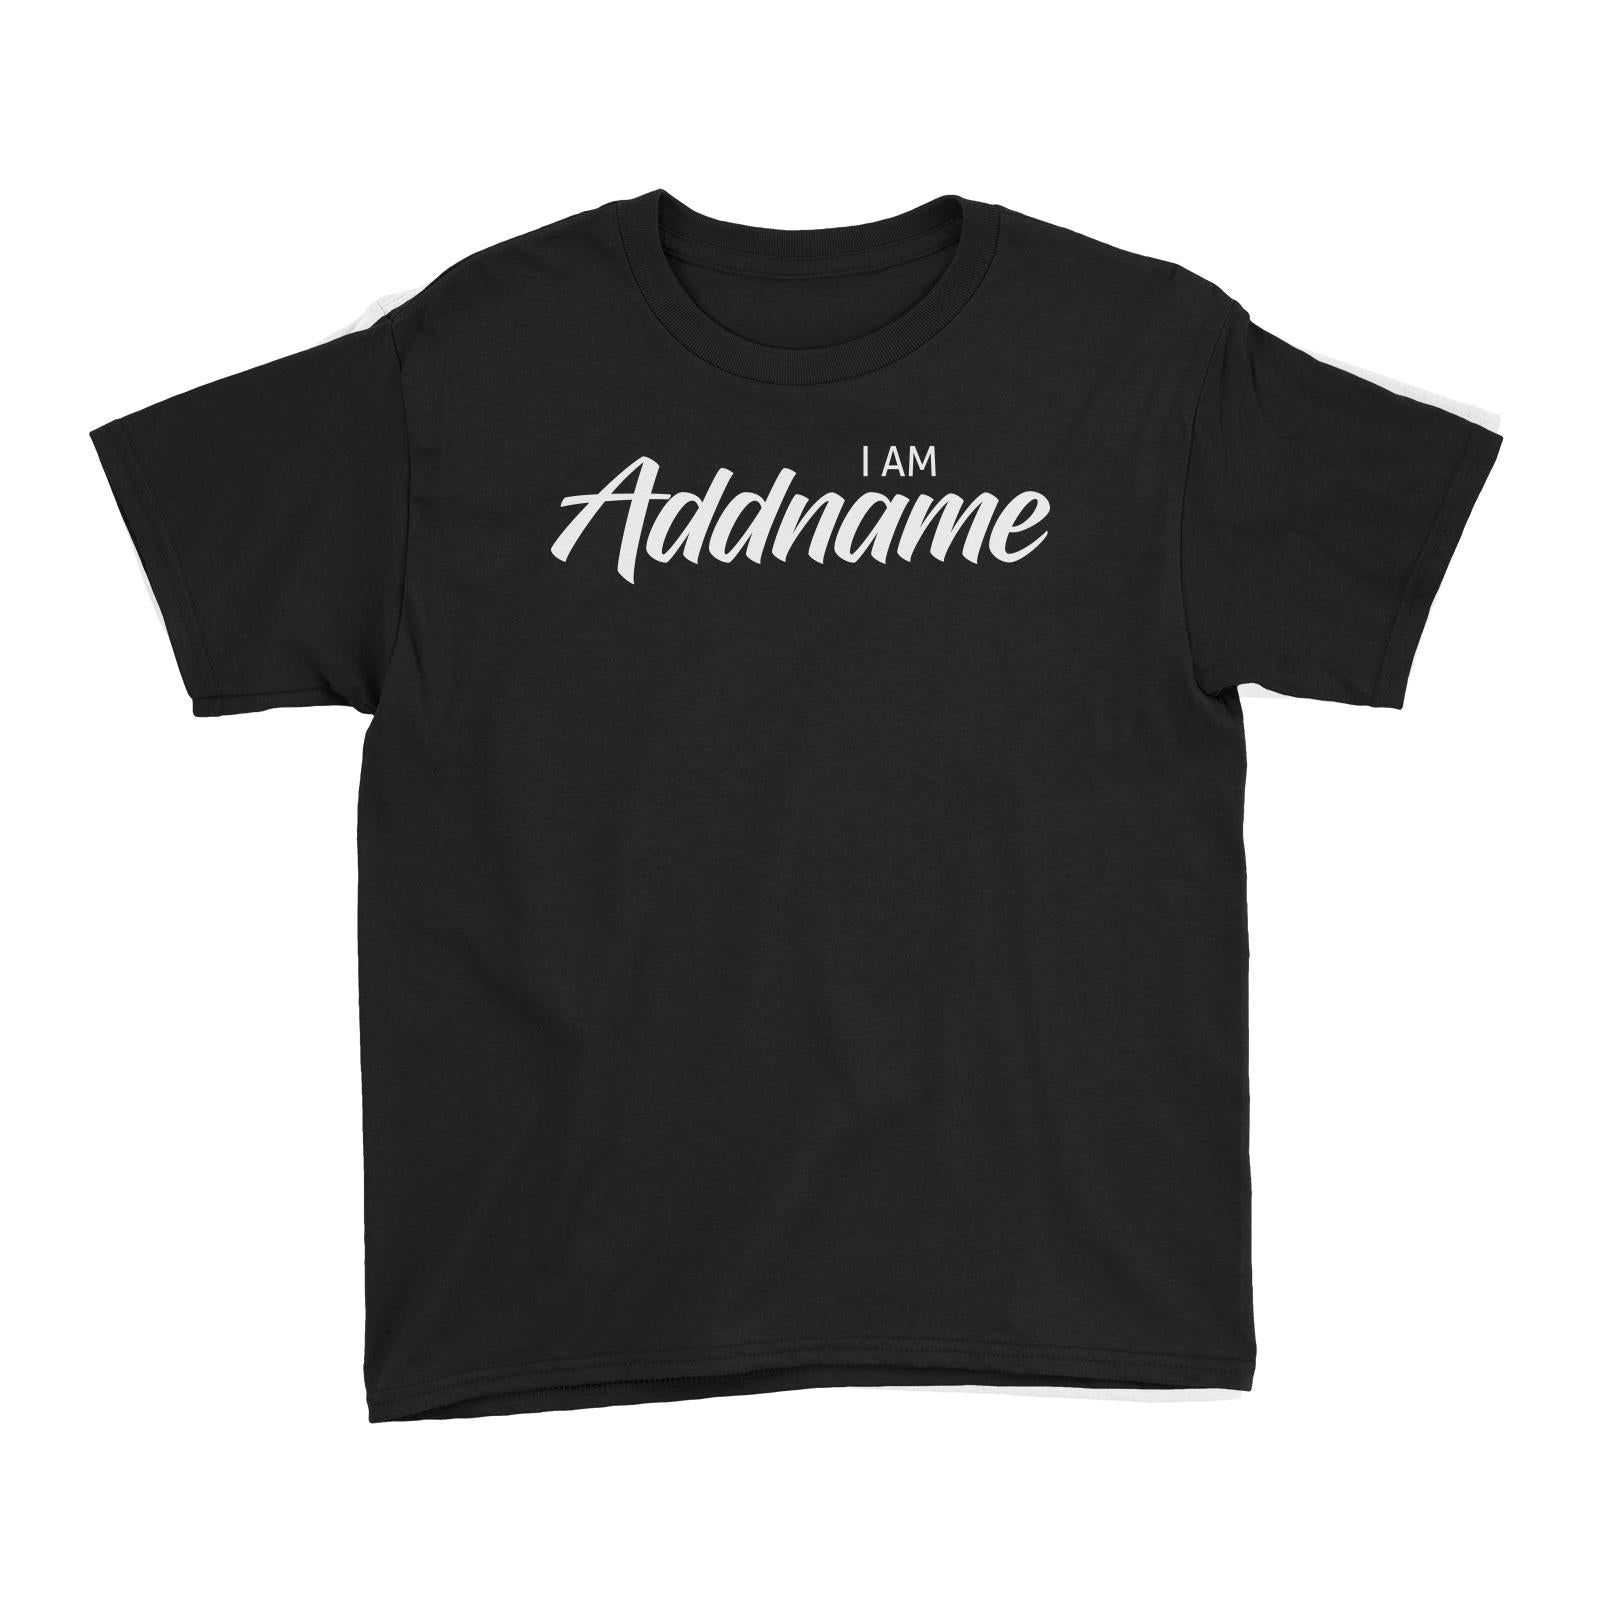 I am Addname Simple Kid's T-Shirt Age Personalizable Designs Matching Family